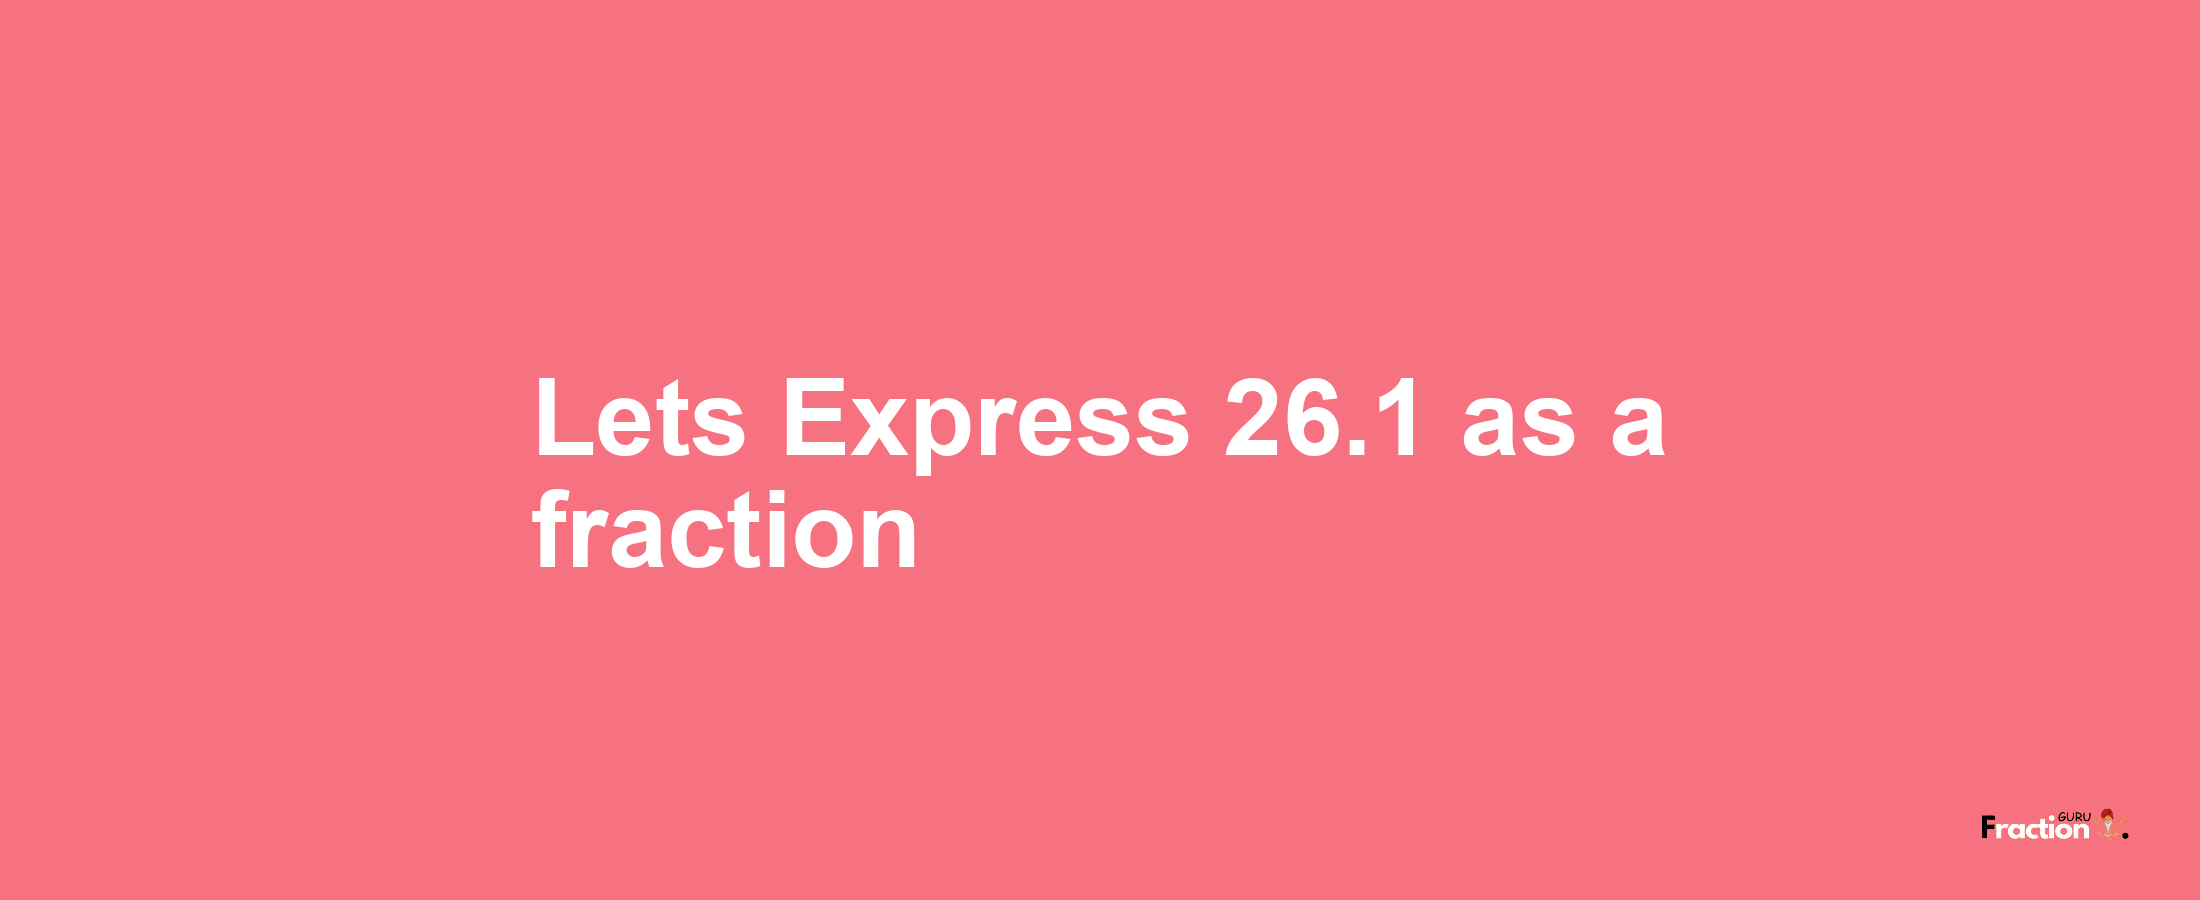 Lets Express 26.1 as afraction